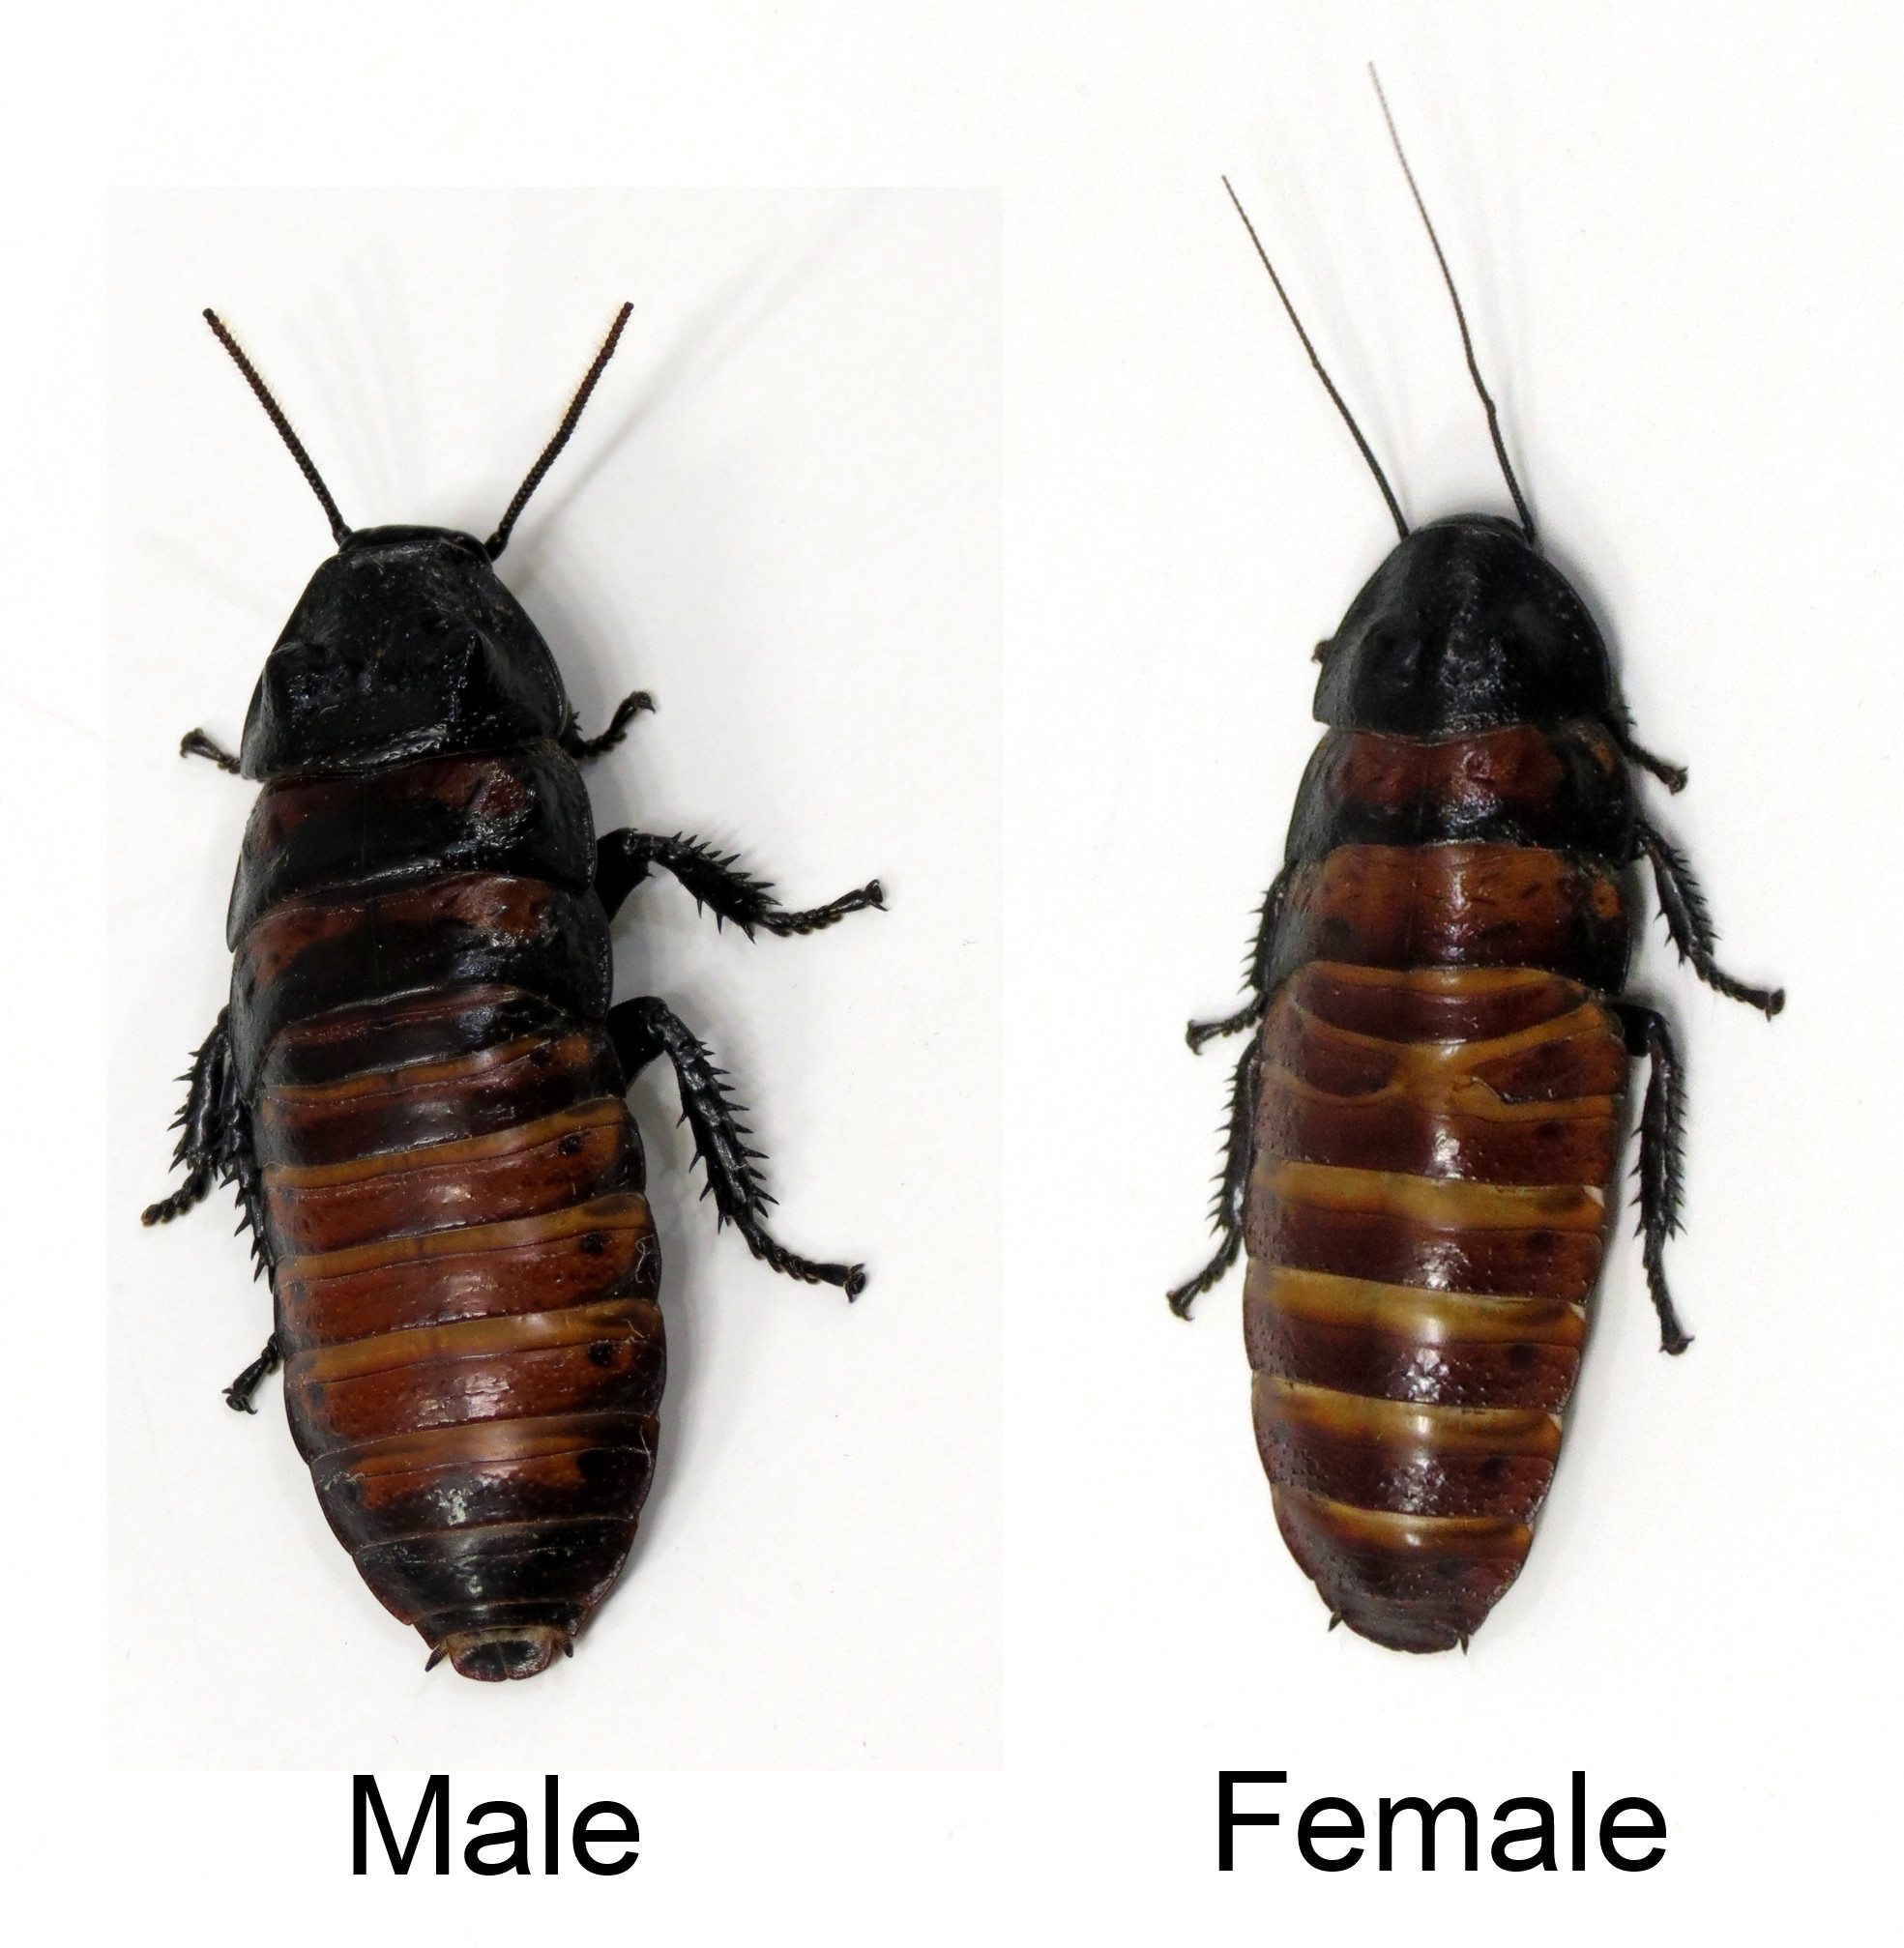 Male and Female Madagascar Hissing Cockroach comparison